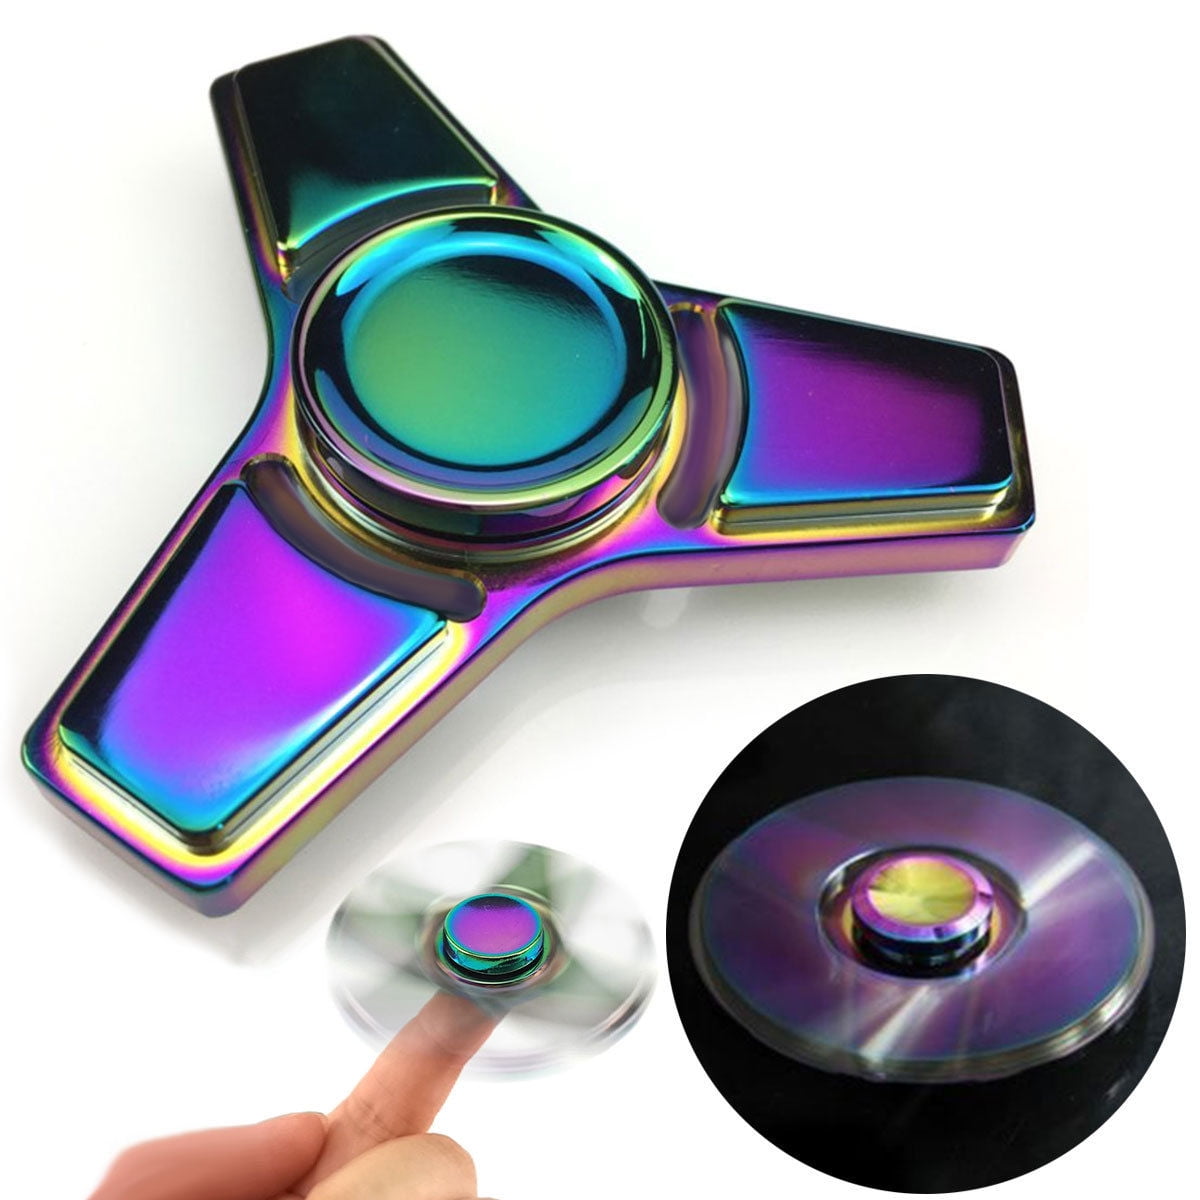 RARE amazing Fidget Spinner rainbow star Metal Hand Finger Toy adult or kids NEW 